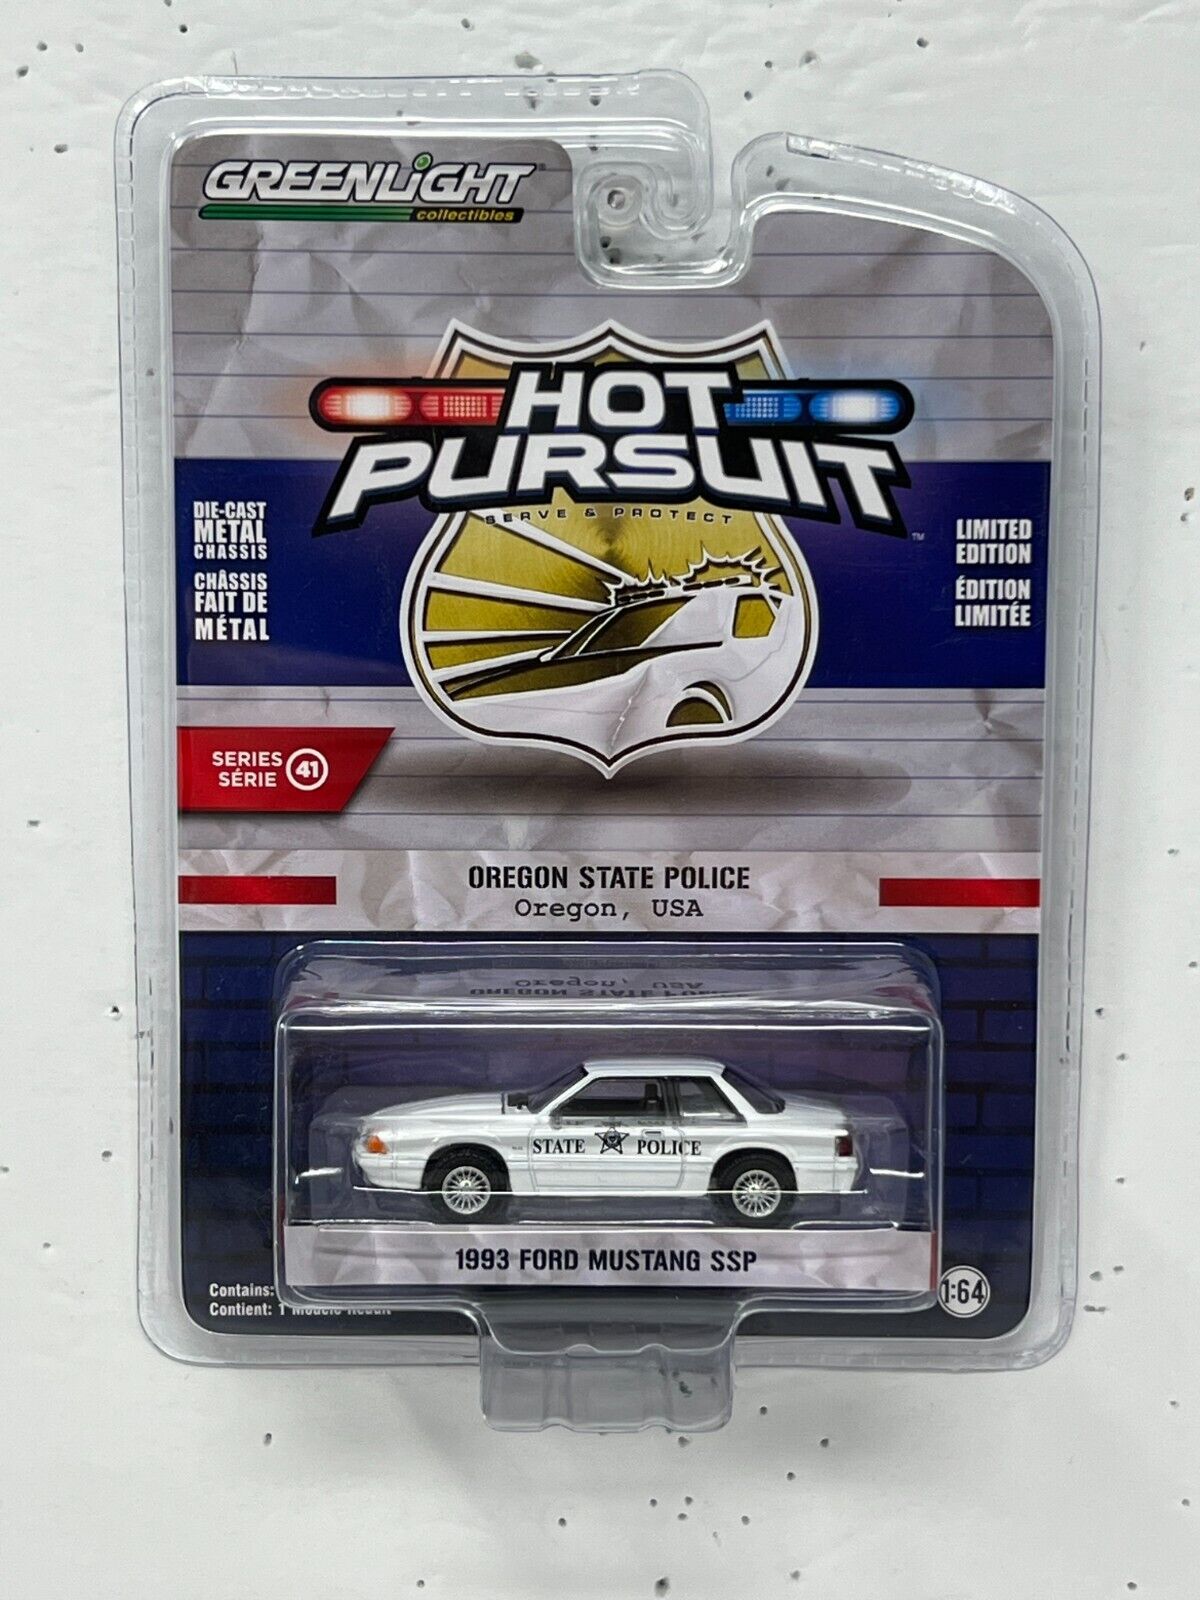 Greenlight Hot Pursuit Oregon State Police 1993 Ford Mustang SSP 1:64 Diecast